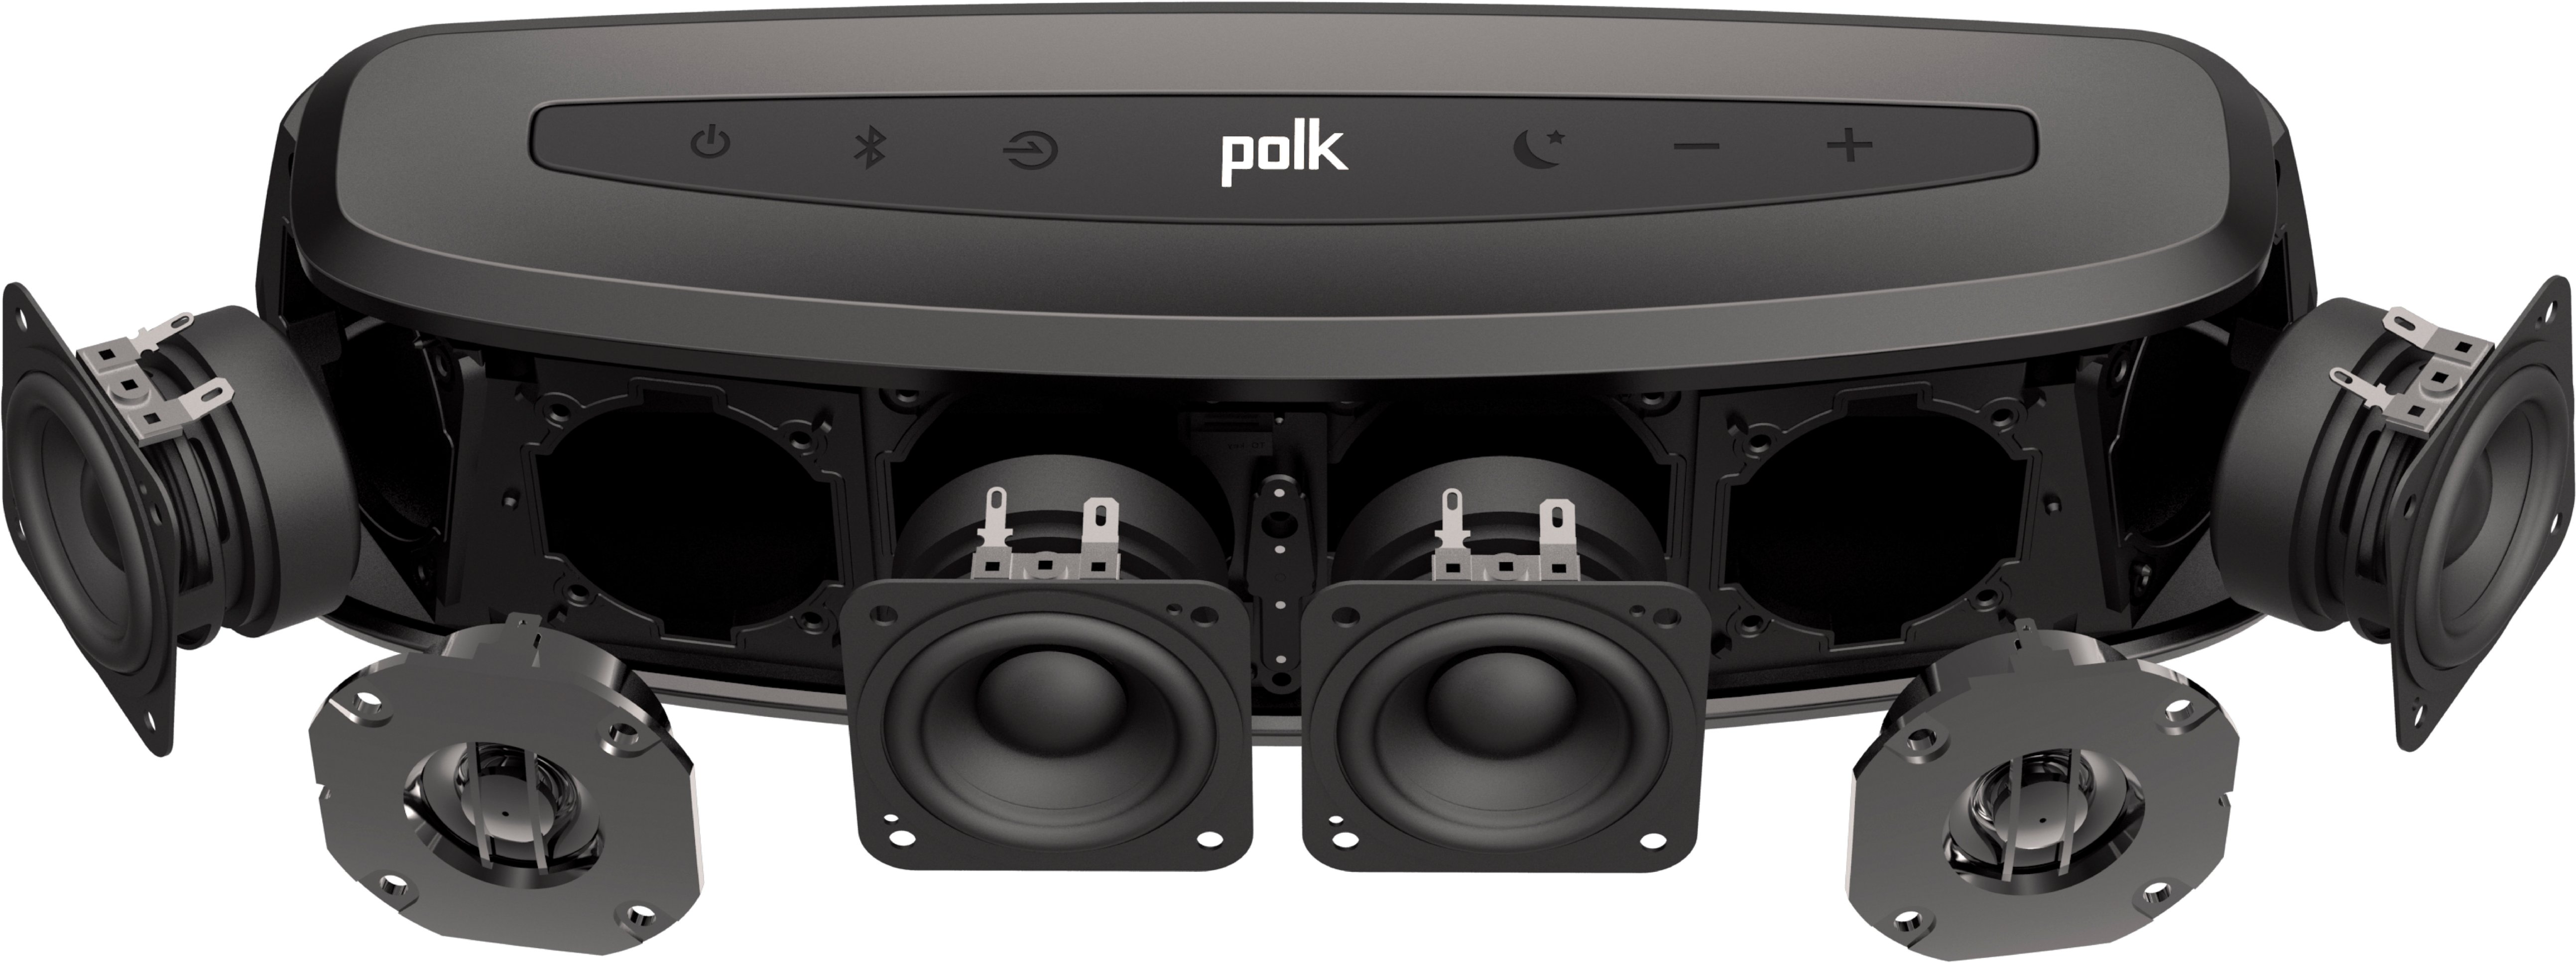 Angle View: Polk Audio - MagniFi Mini Home Theater Compact Sound Bar with Wireless Subwoofer - Black